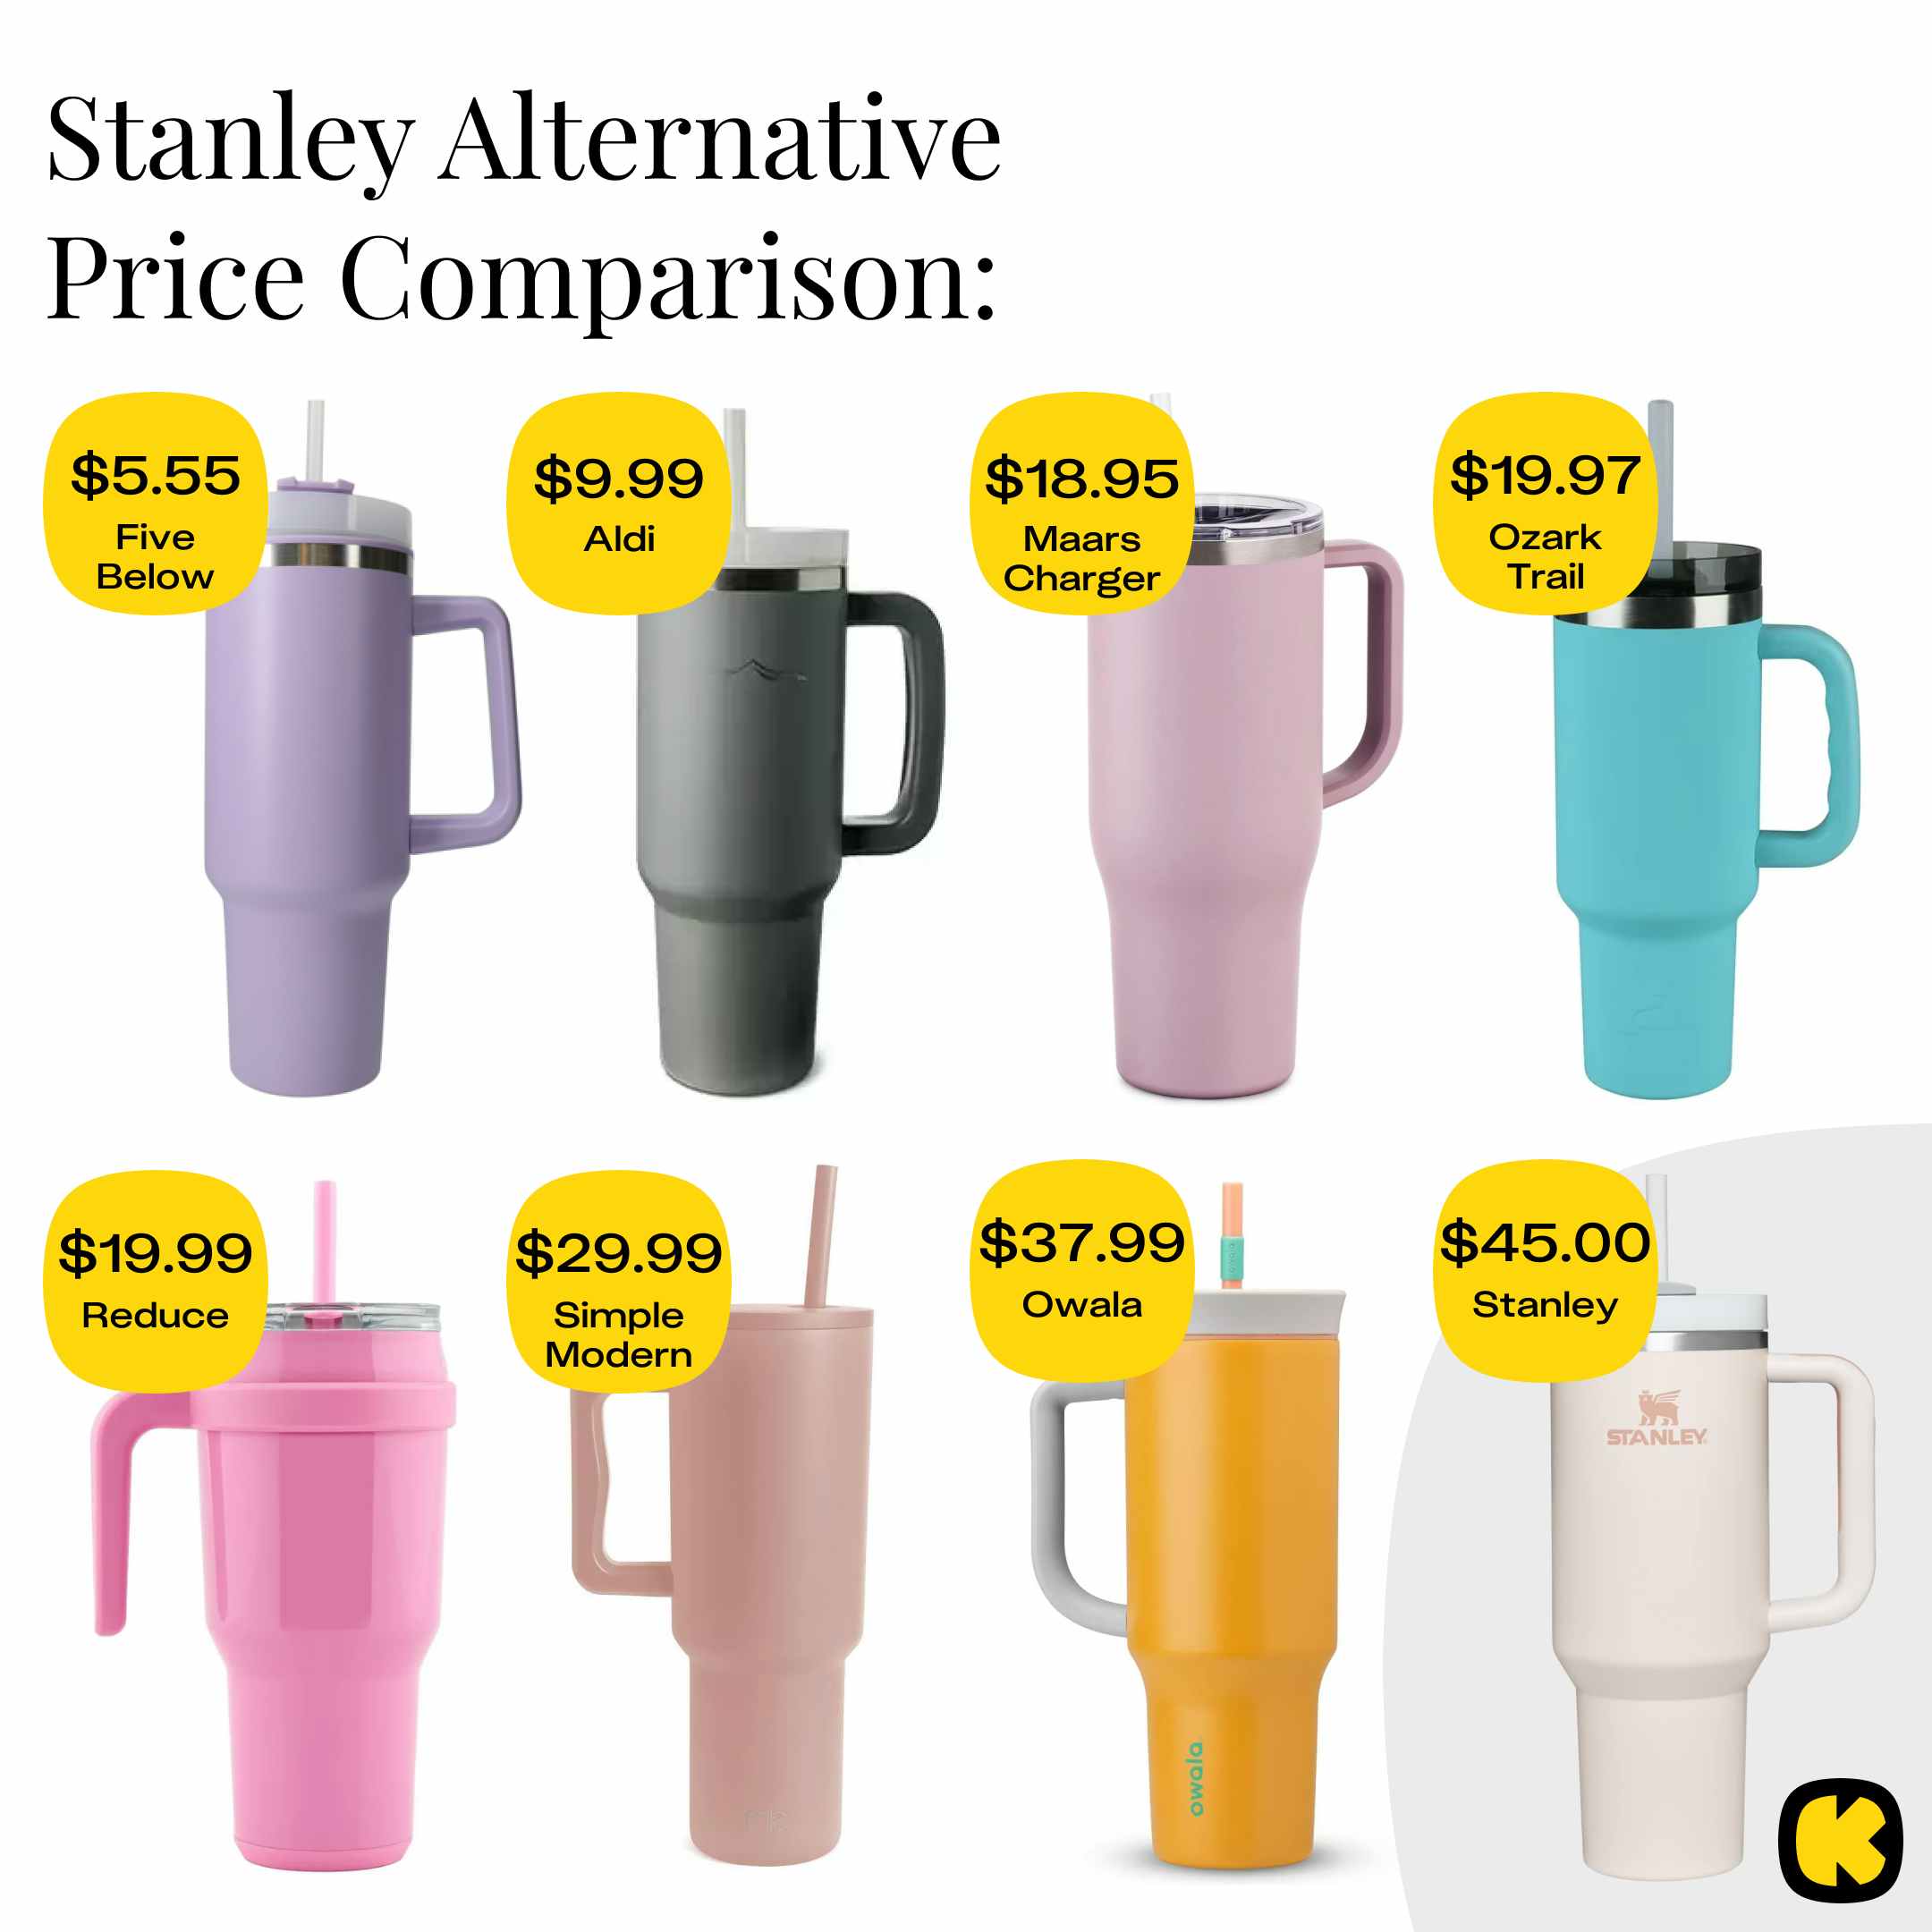 https://prod-cdn-thekrazycouponlady.imgix.net/wp-content/uploads/2023/02/stanley-alternative-insta-1693326077-1693326078.png?auto=format&fit=fill&q=25